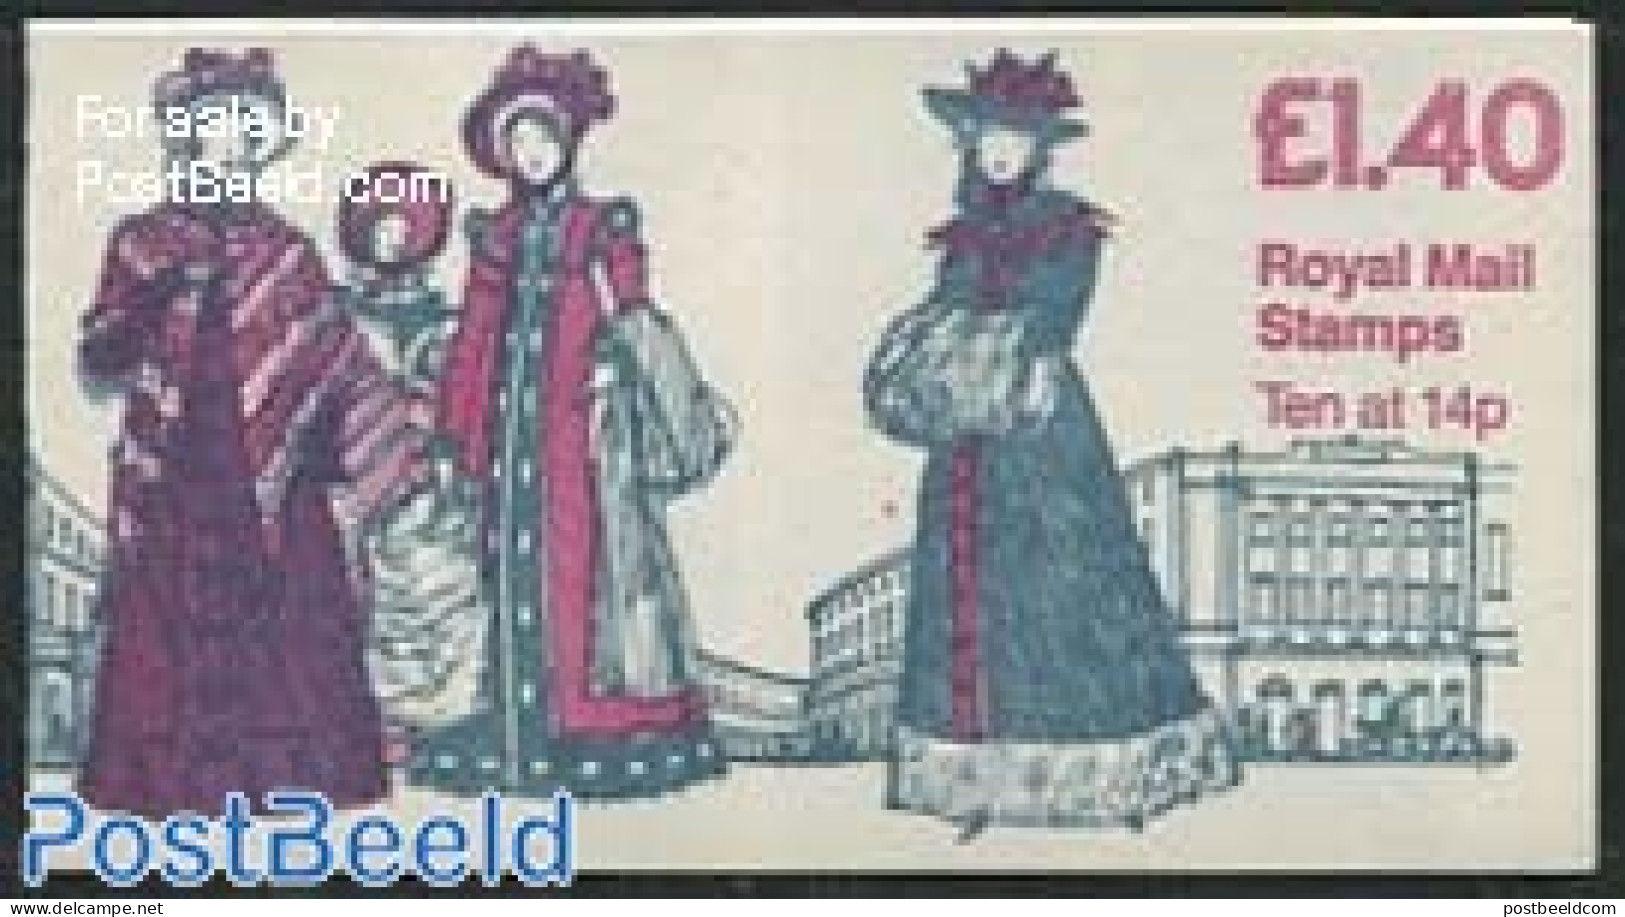 Great Britain 1981 Def. Booklet, Fashion 1815-1830, Selvedge Left, Mint NH, Stamp Booklets - Art - Fashion - Neufs